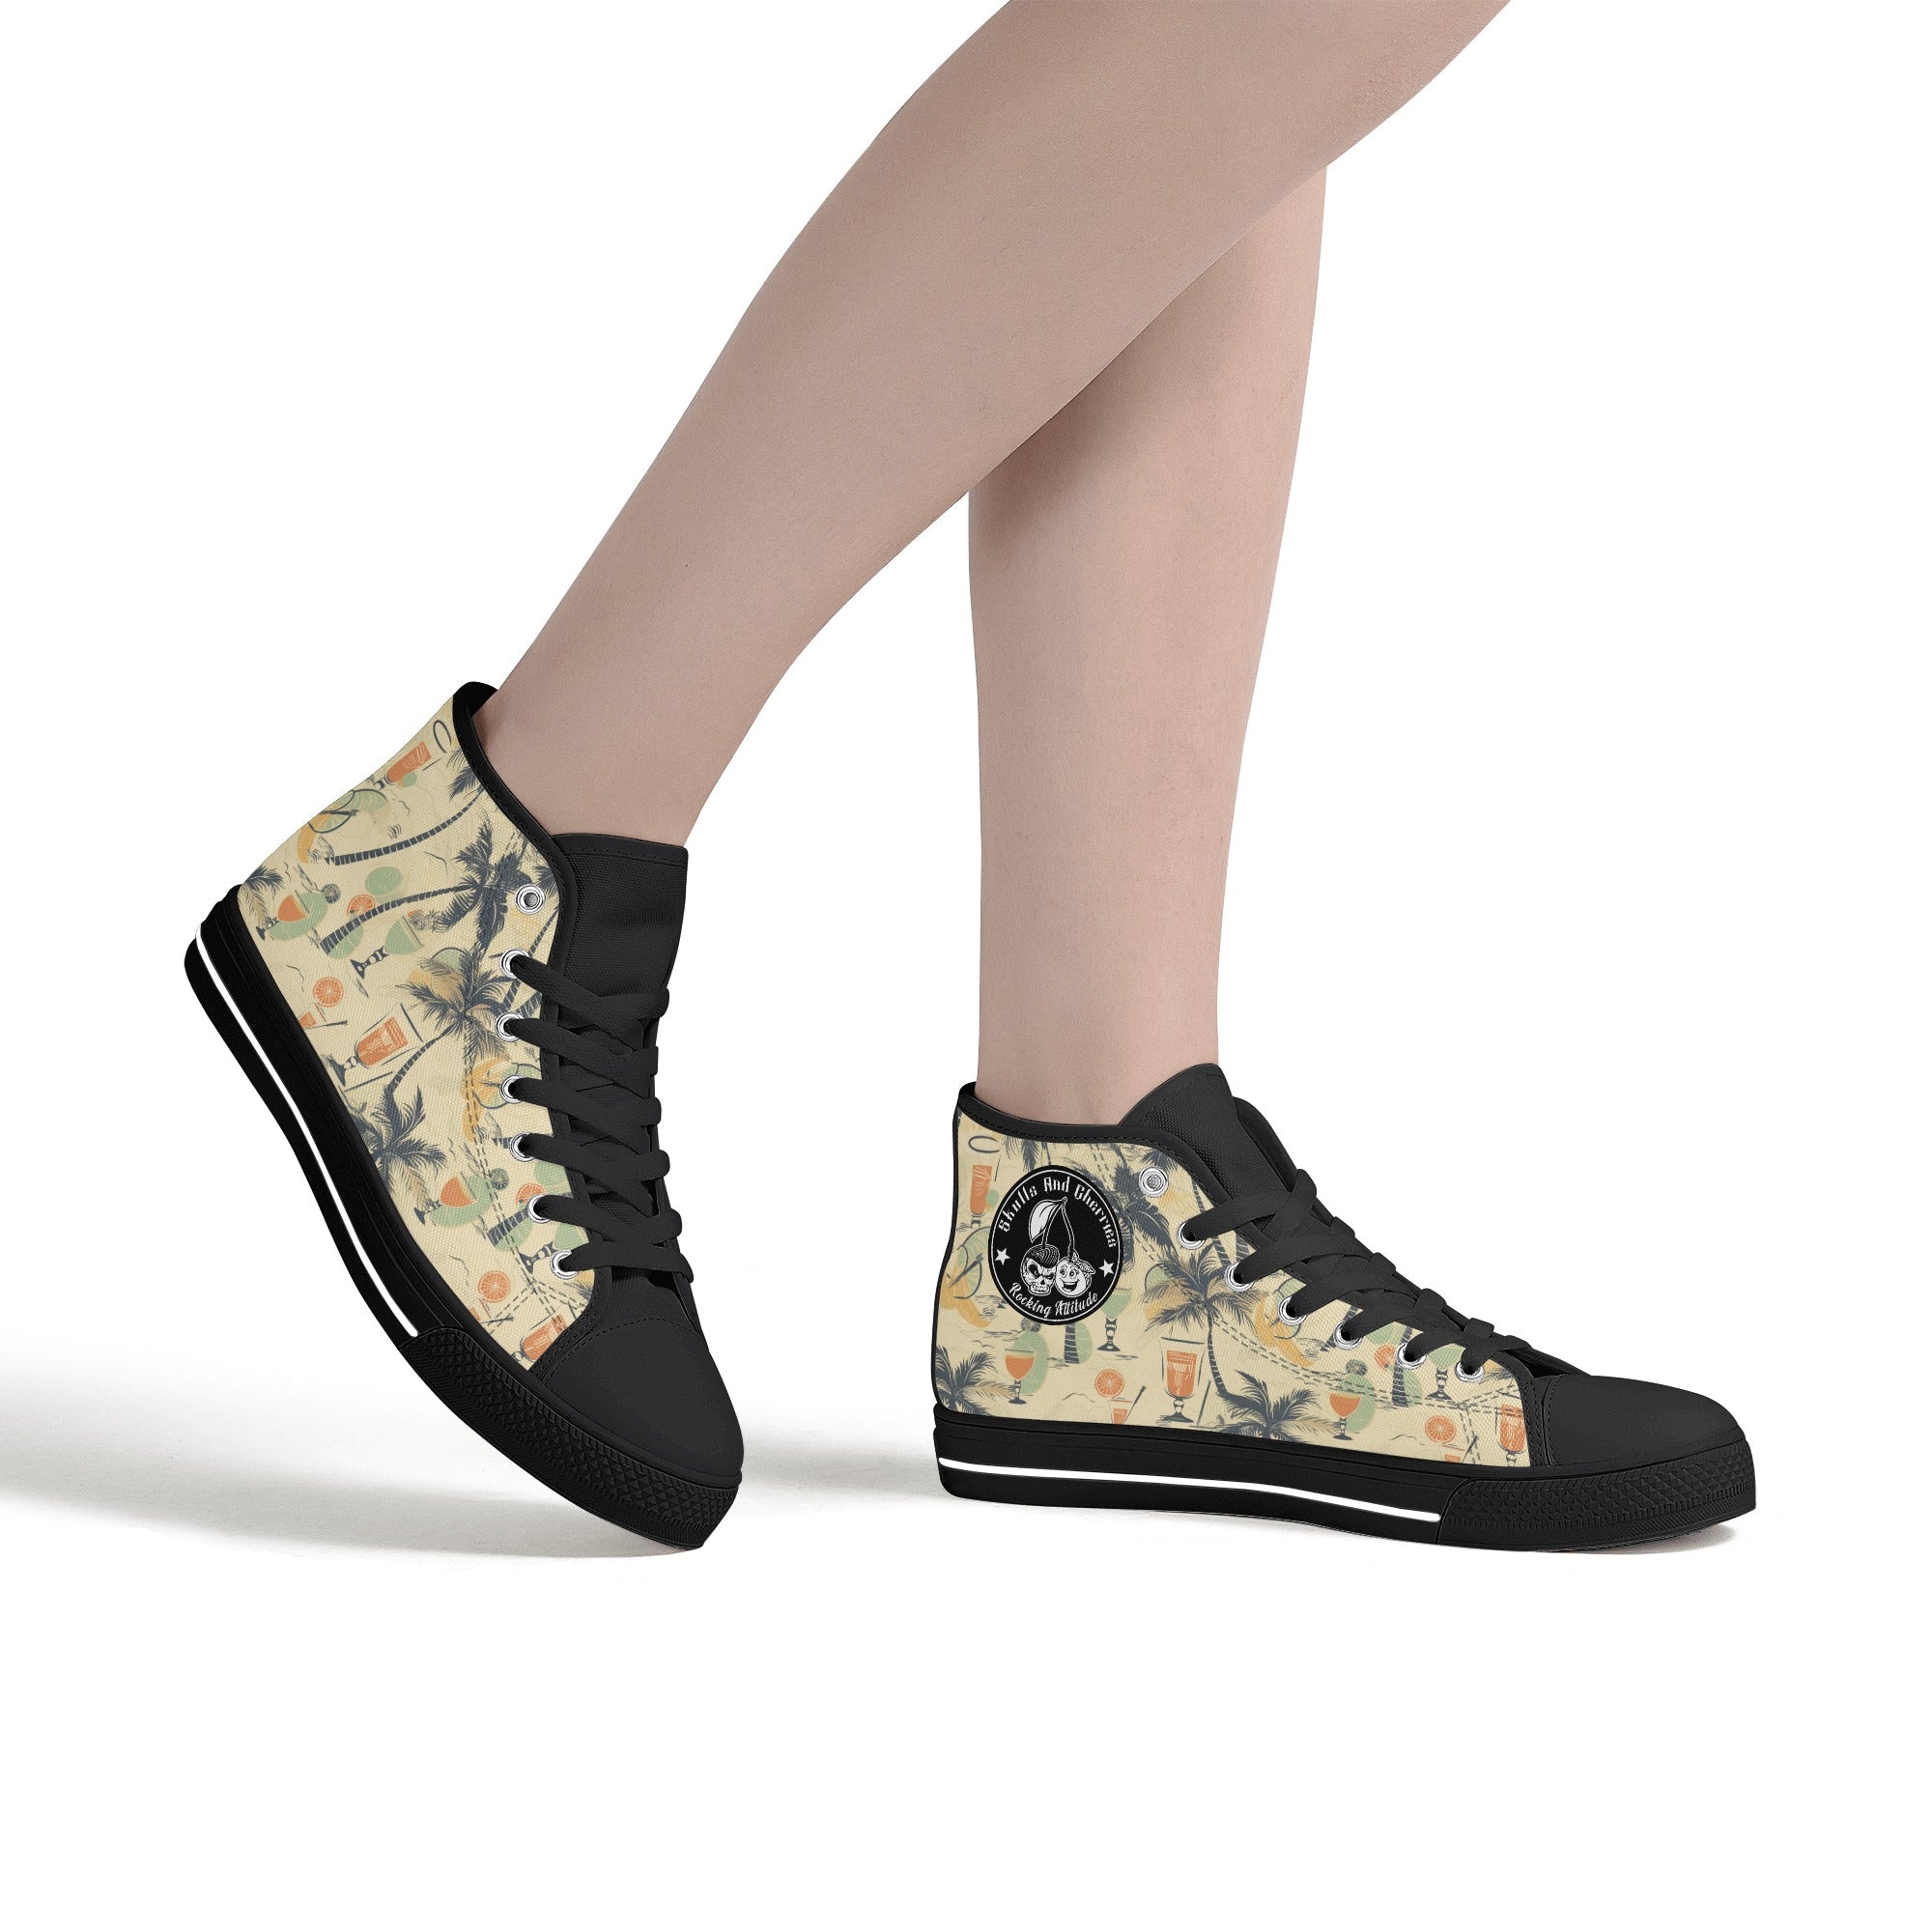 Hawaiian Palm Scene with Drinks Women's Psychobilly High Top shoes